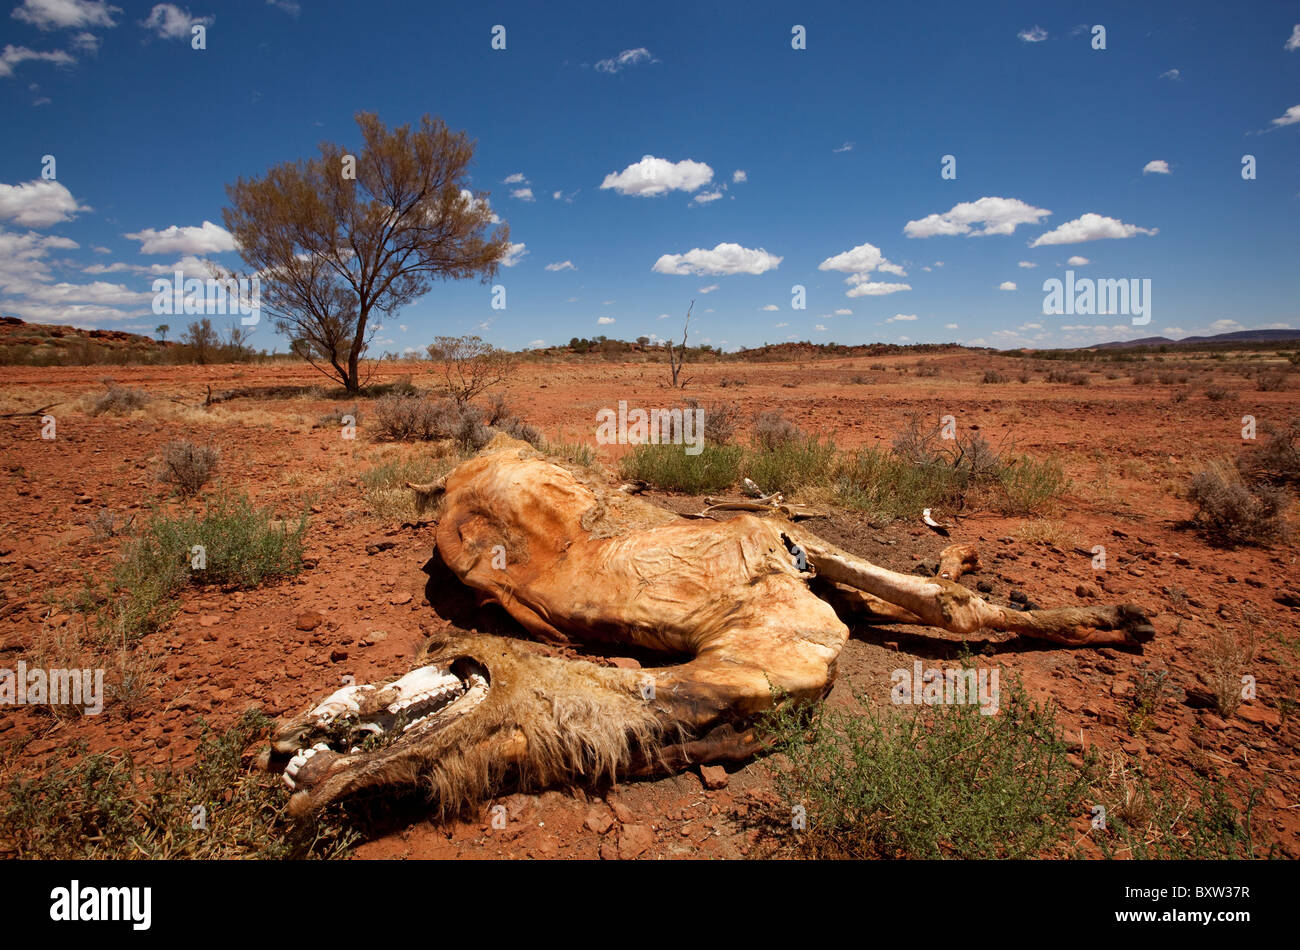 Australia, Northern Territory, Dead camel in outback desert Stock Photo